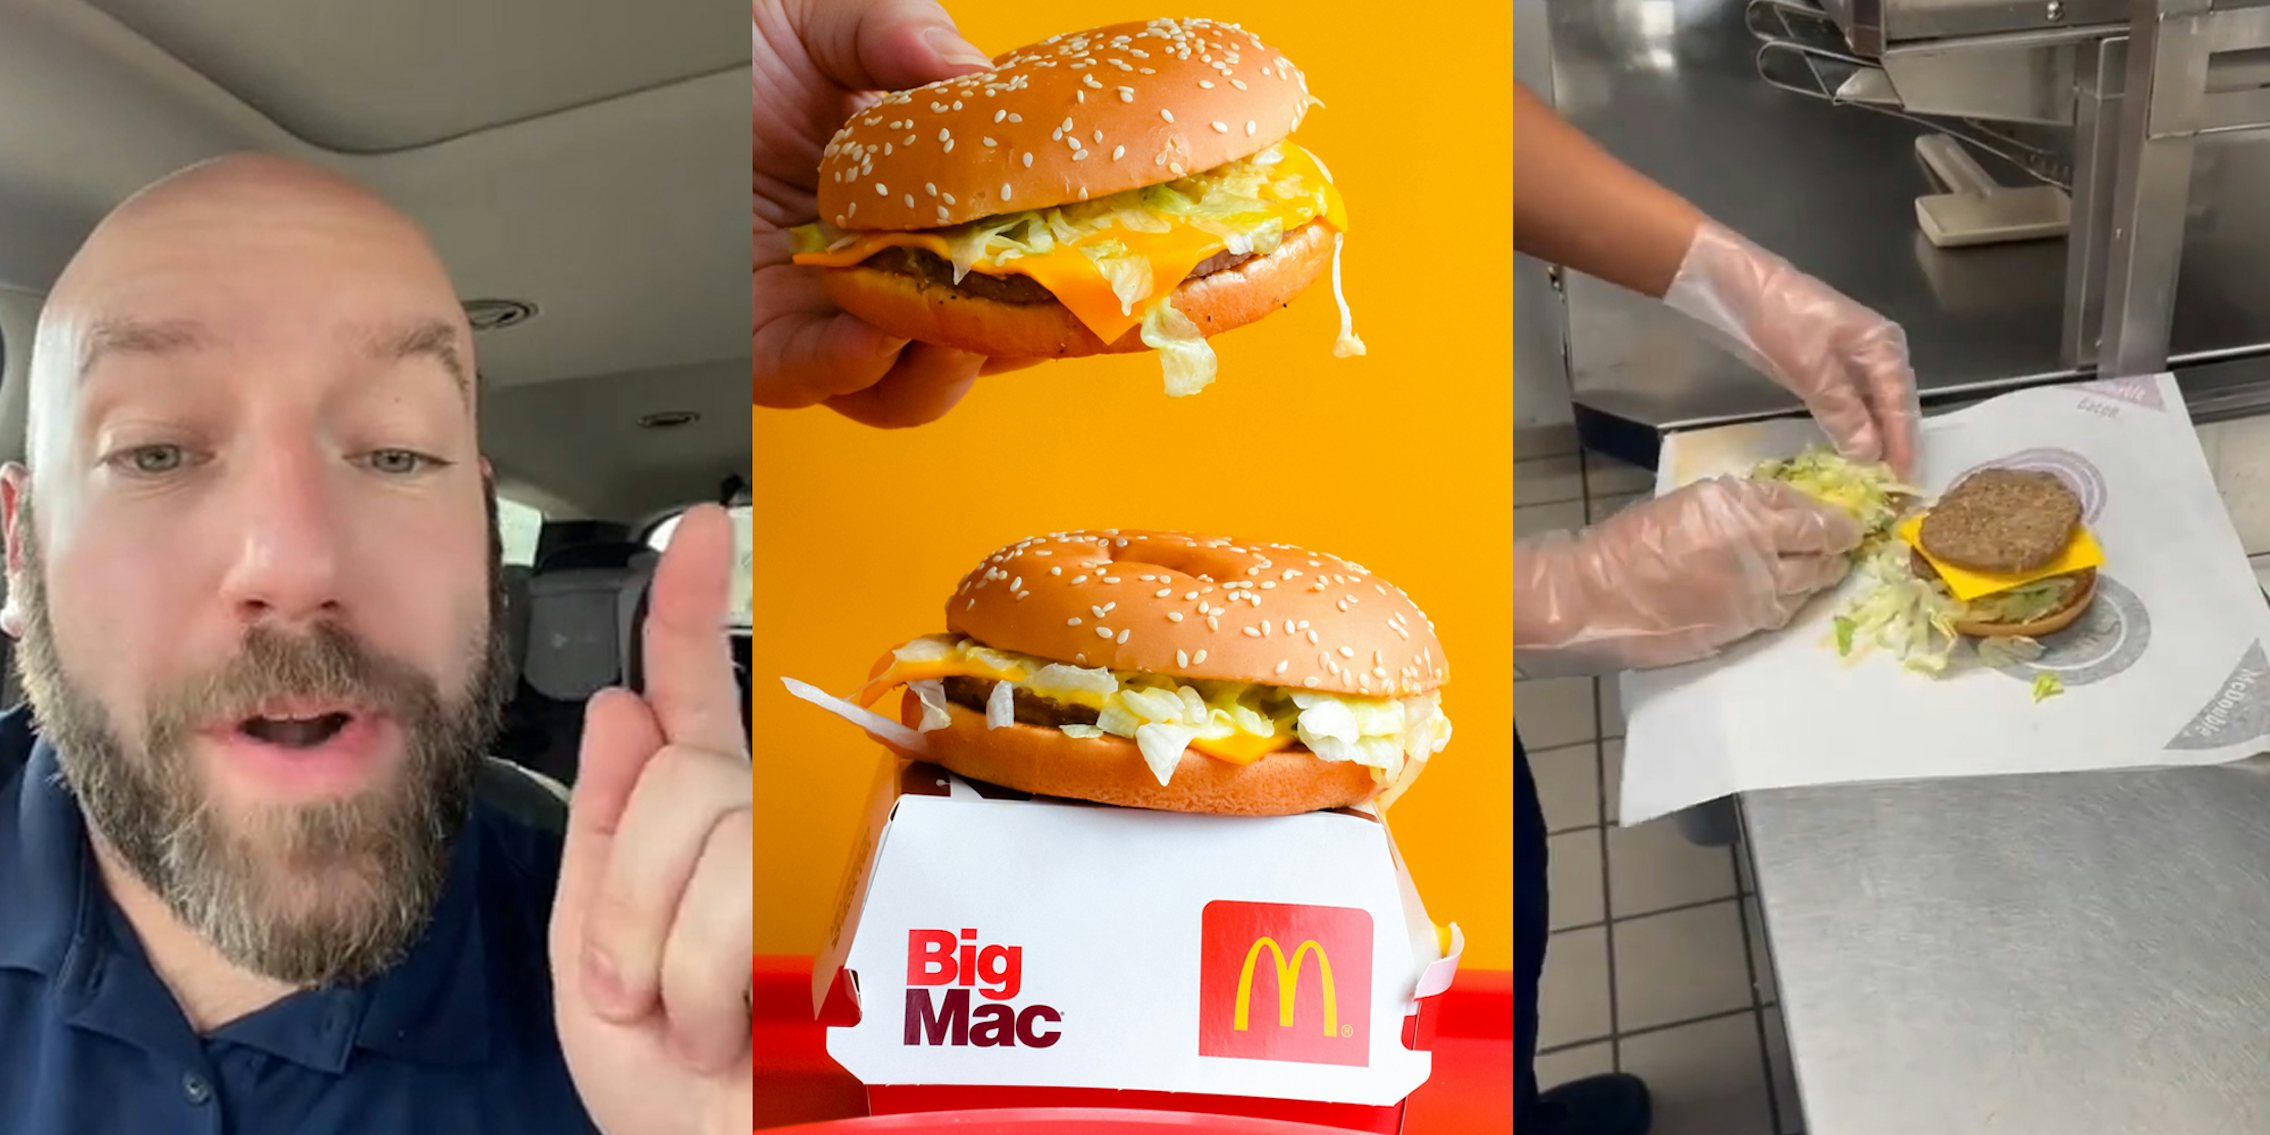 former McDonald's corporate chef speaking (l) hand holding McDouble above Big Mac in front of yellow background (c) McDonald's worker making Big Mac style McDouble (r)